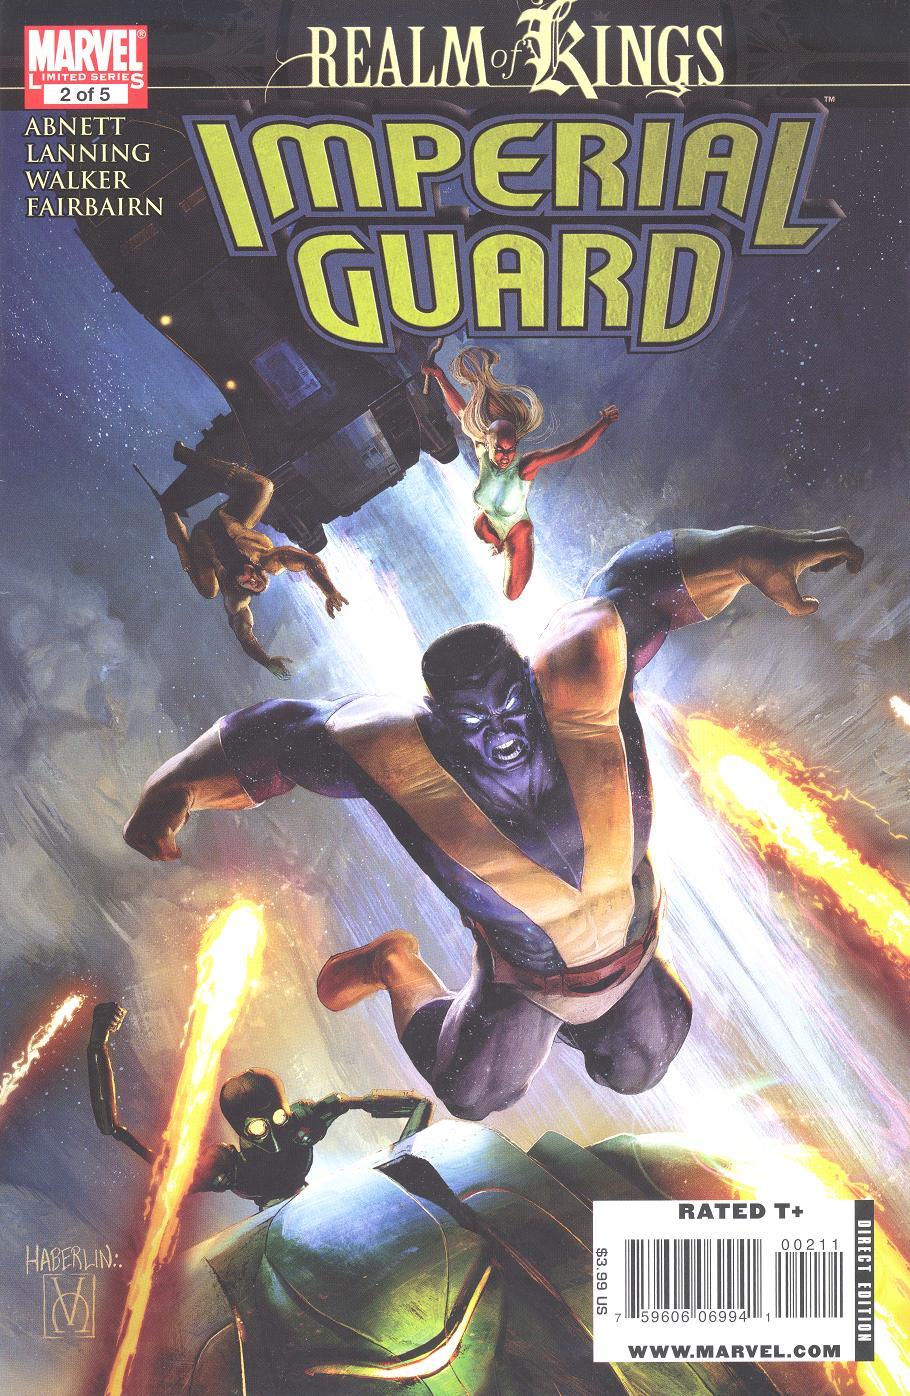 Realm of Kings: Imperial Guard Vol. 1 #2